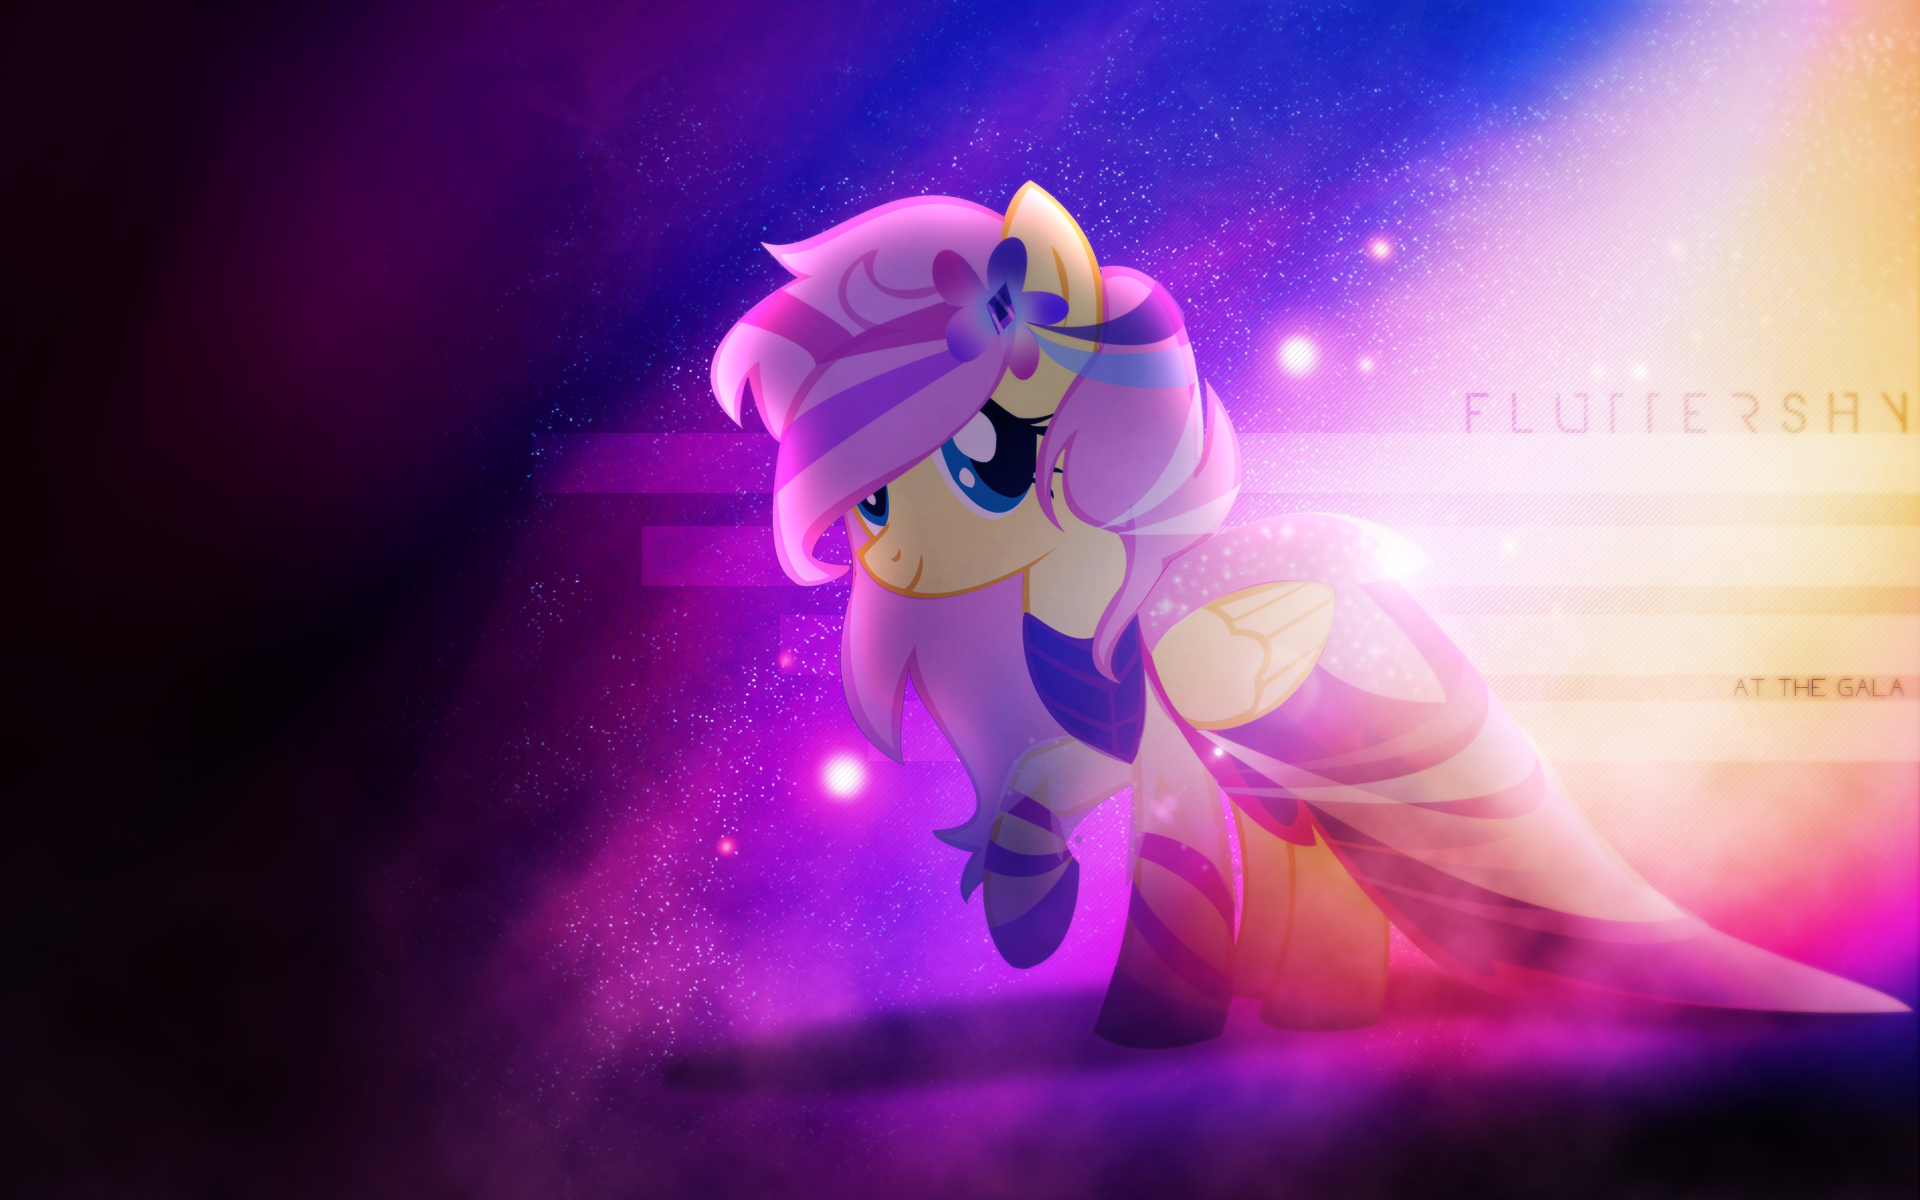 At the Gala | Fluttershy [Alternative] by kaninerochkaninungar and Vexx3